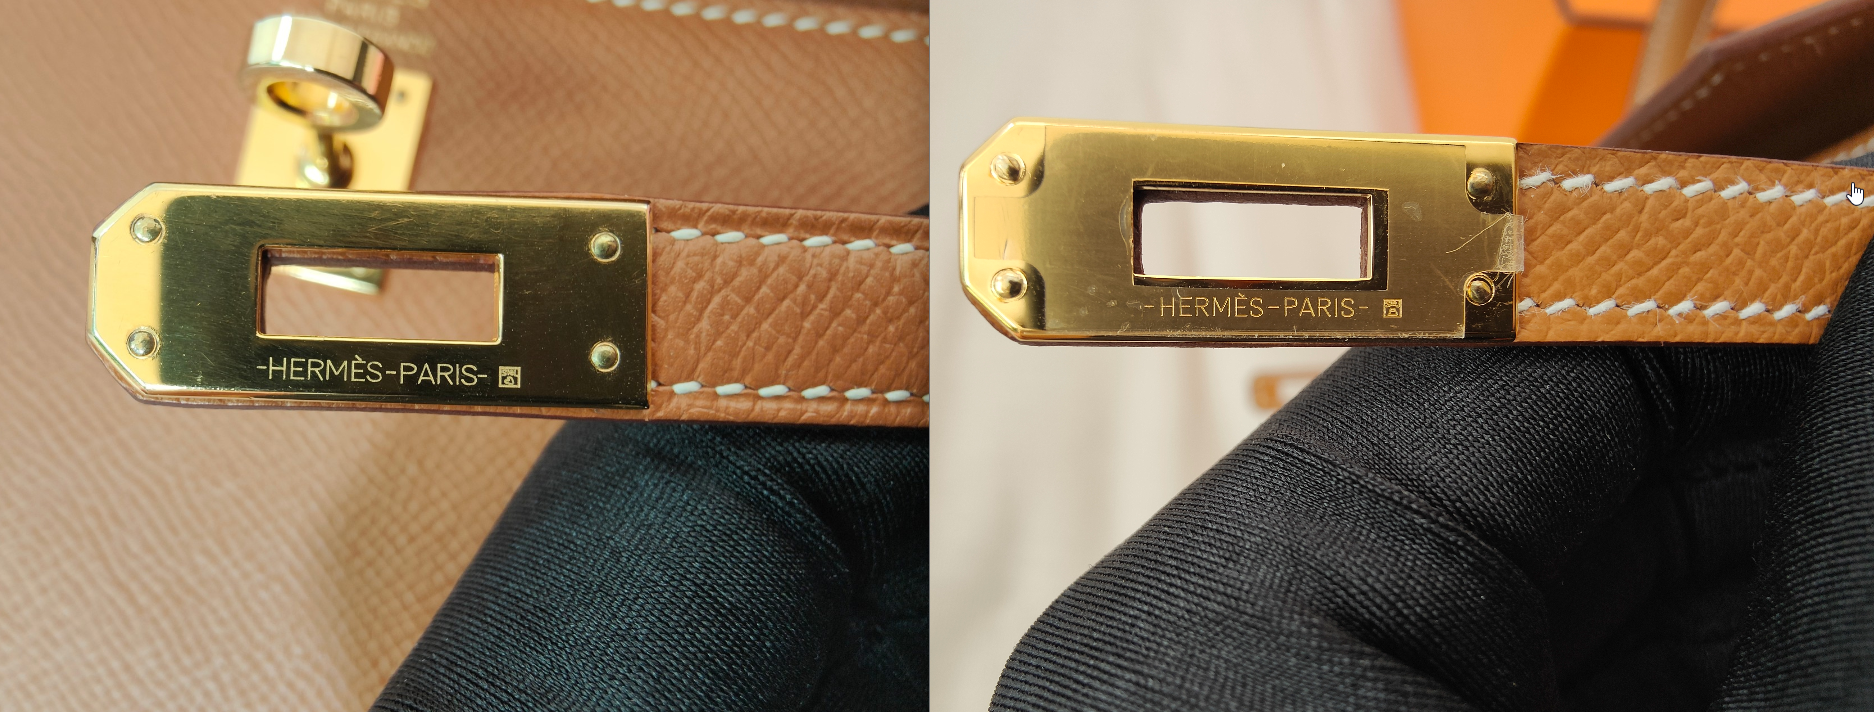 HERMES AUTHENTICATION – The Woman Behind The Brand